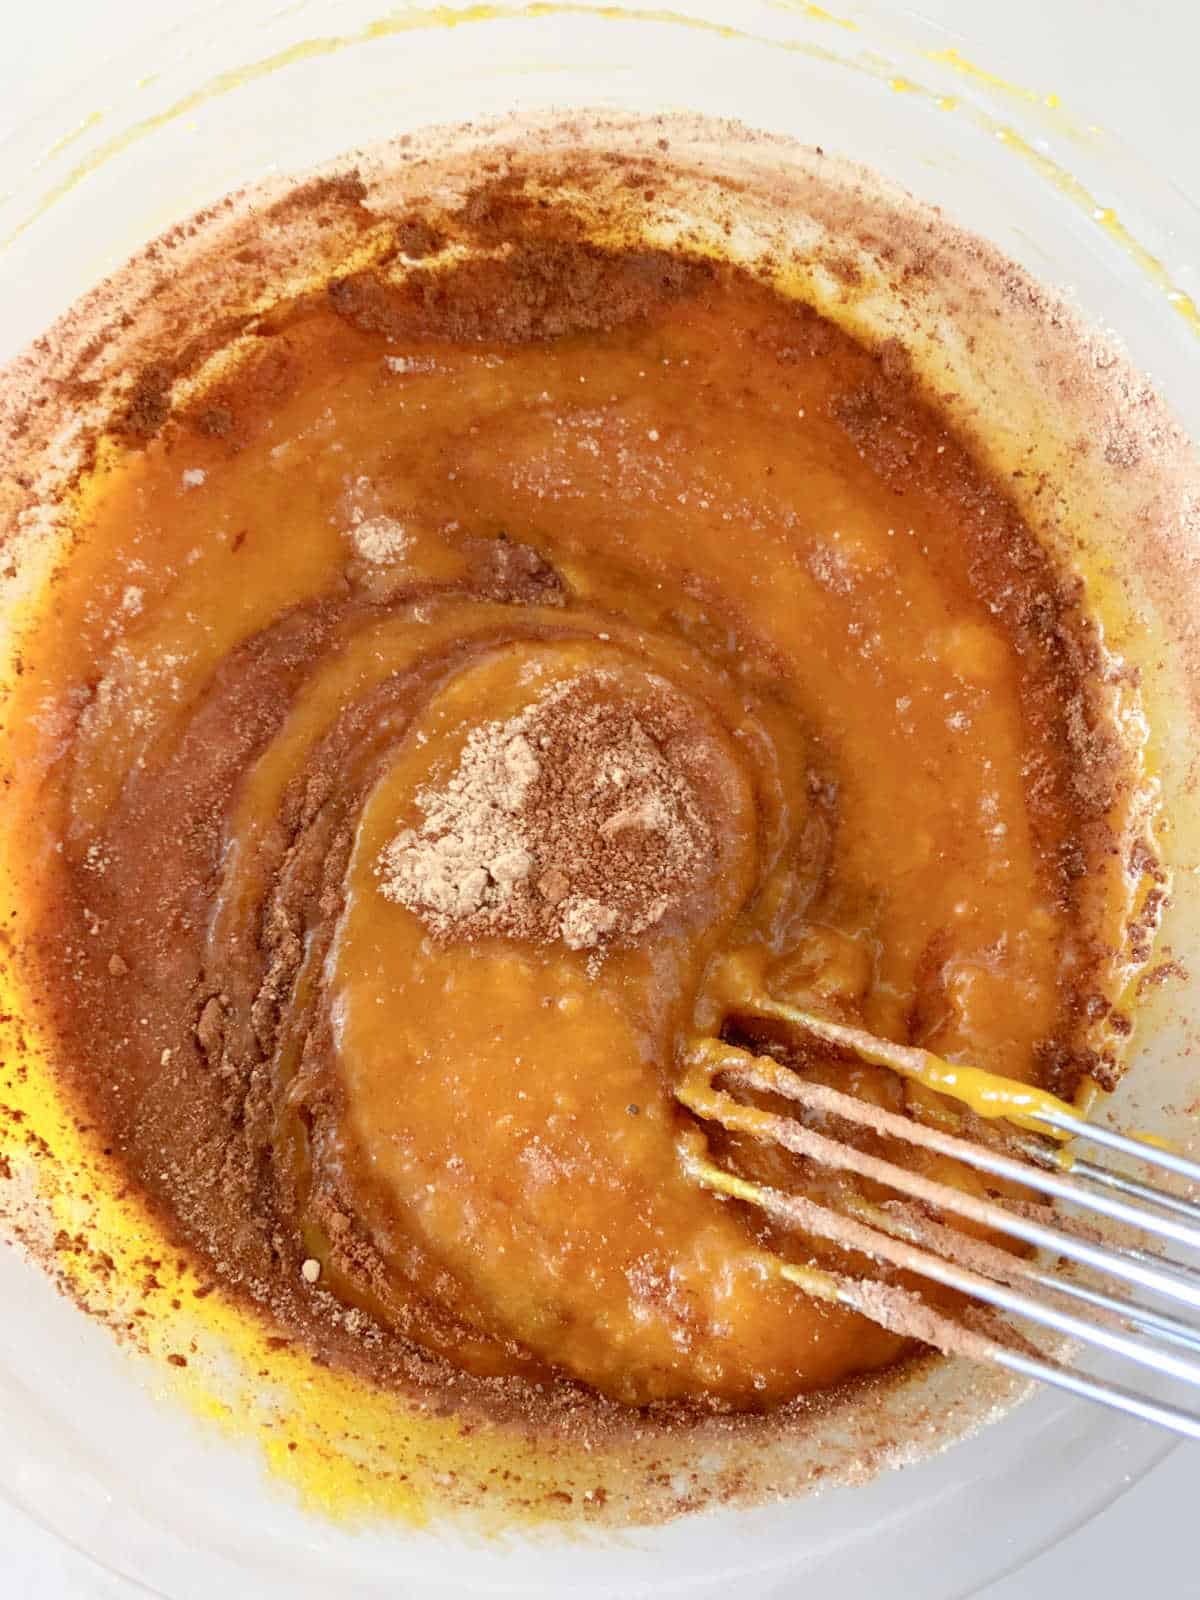 Mixing spices into pumpkin batter with a whisk.